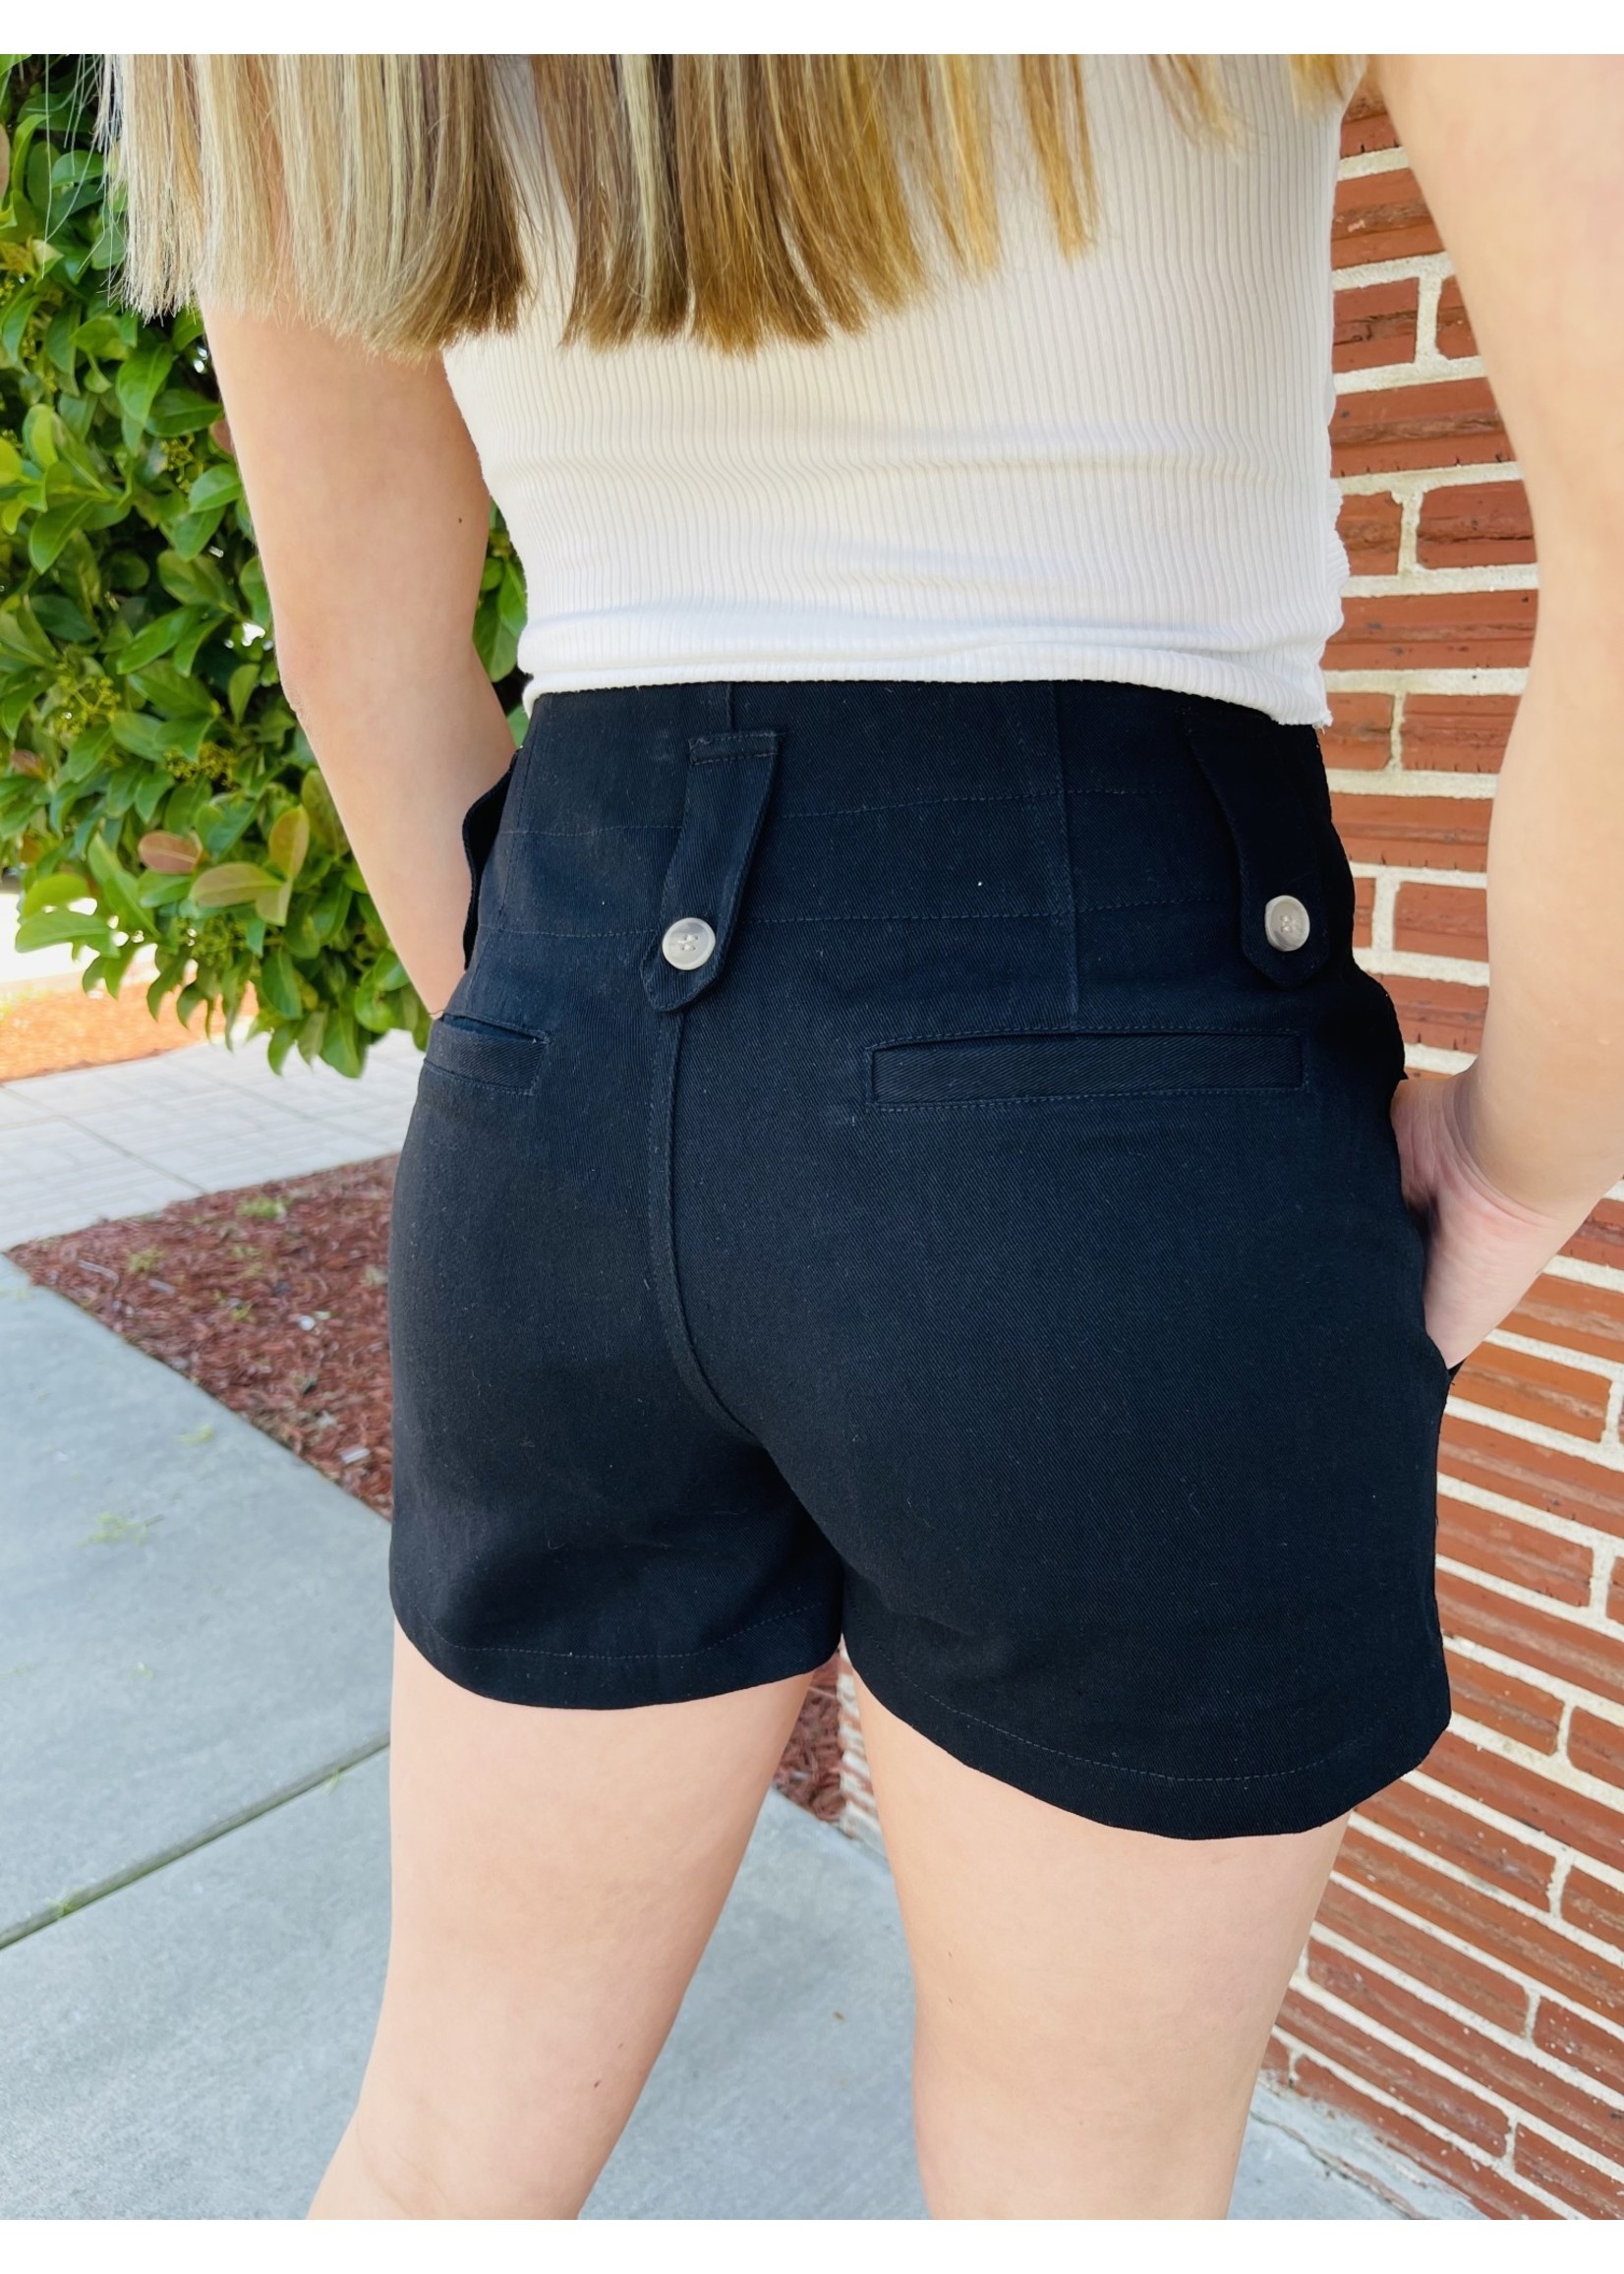 Black Shorts with Pockets and Button Detail